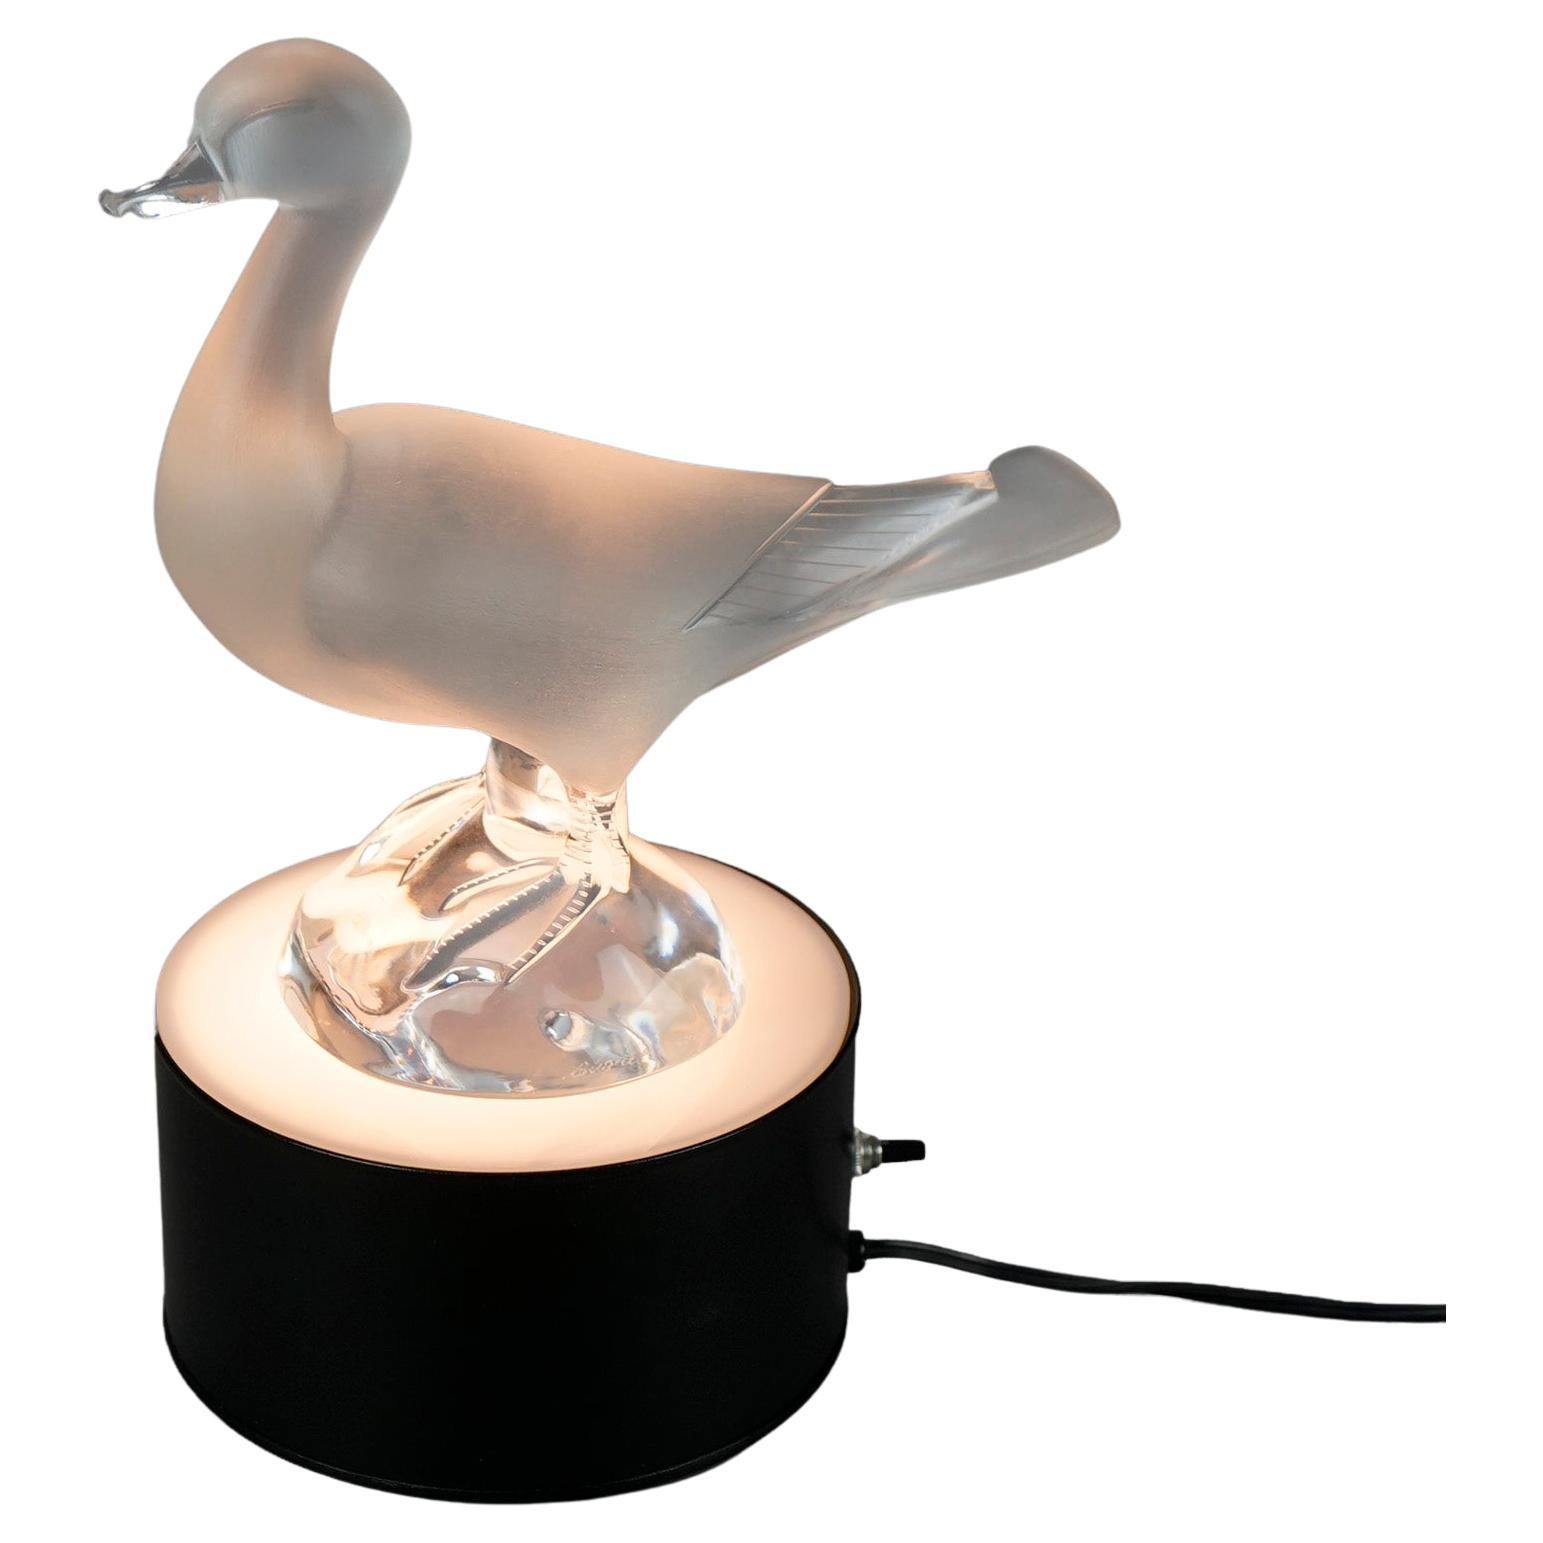 A French duck sculpture by Lalique offers standing duck on lighted base, signed, 20th century

Measures- overall 13.5''H x 9''W x 6.75''D; duck only 9.5''H x 4.25''W x 9.25''L; pedestal only 3.5''H x 6.75''Diam